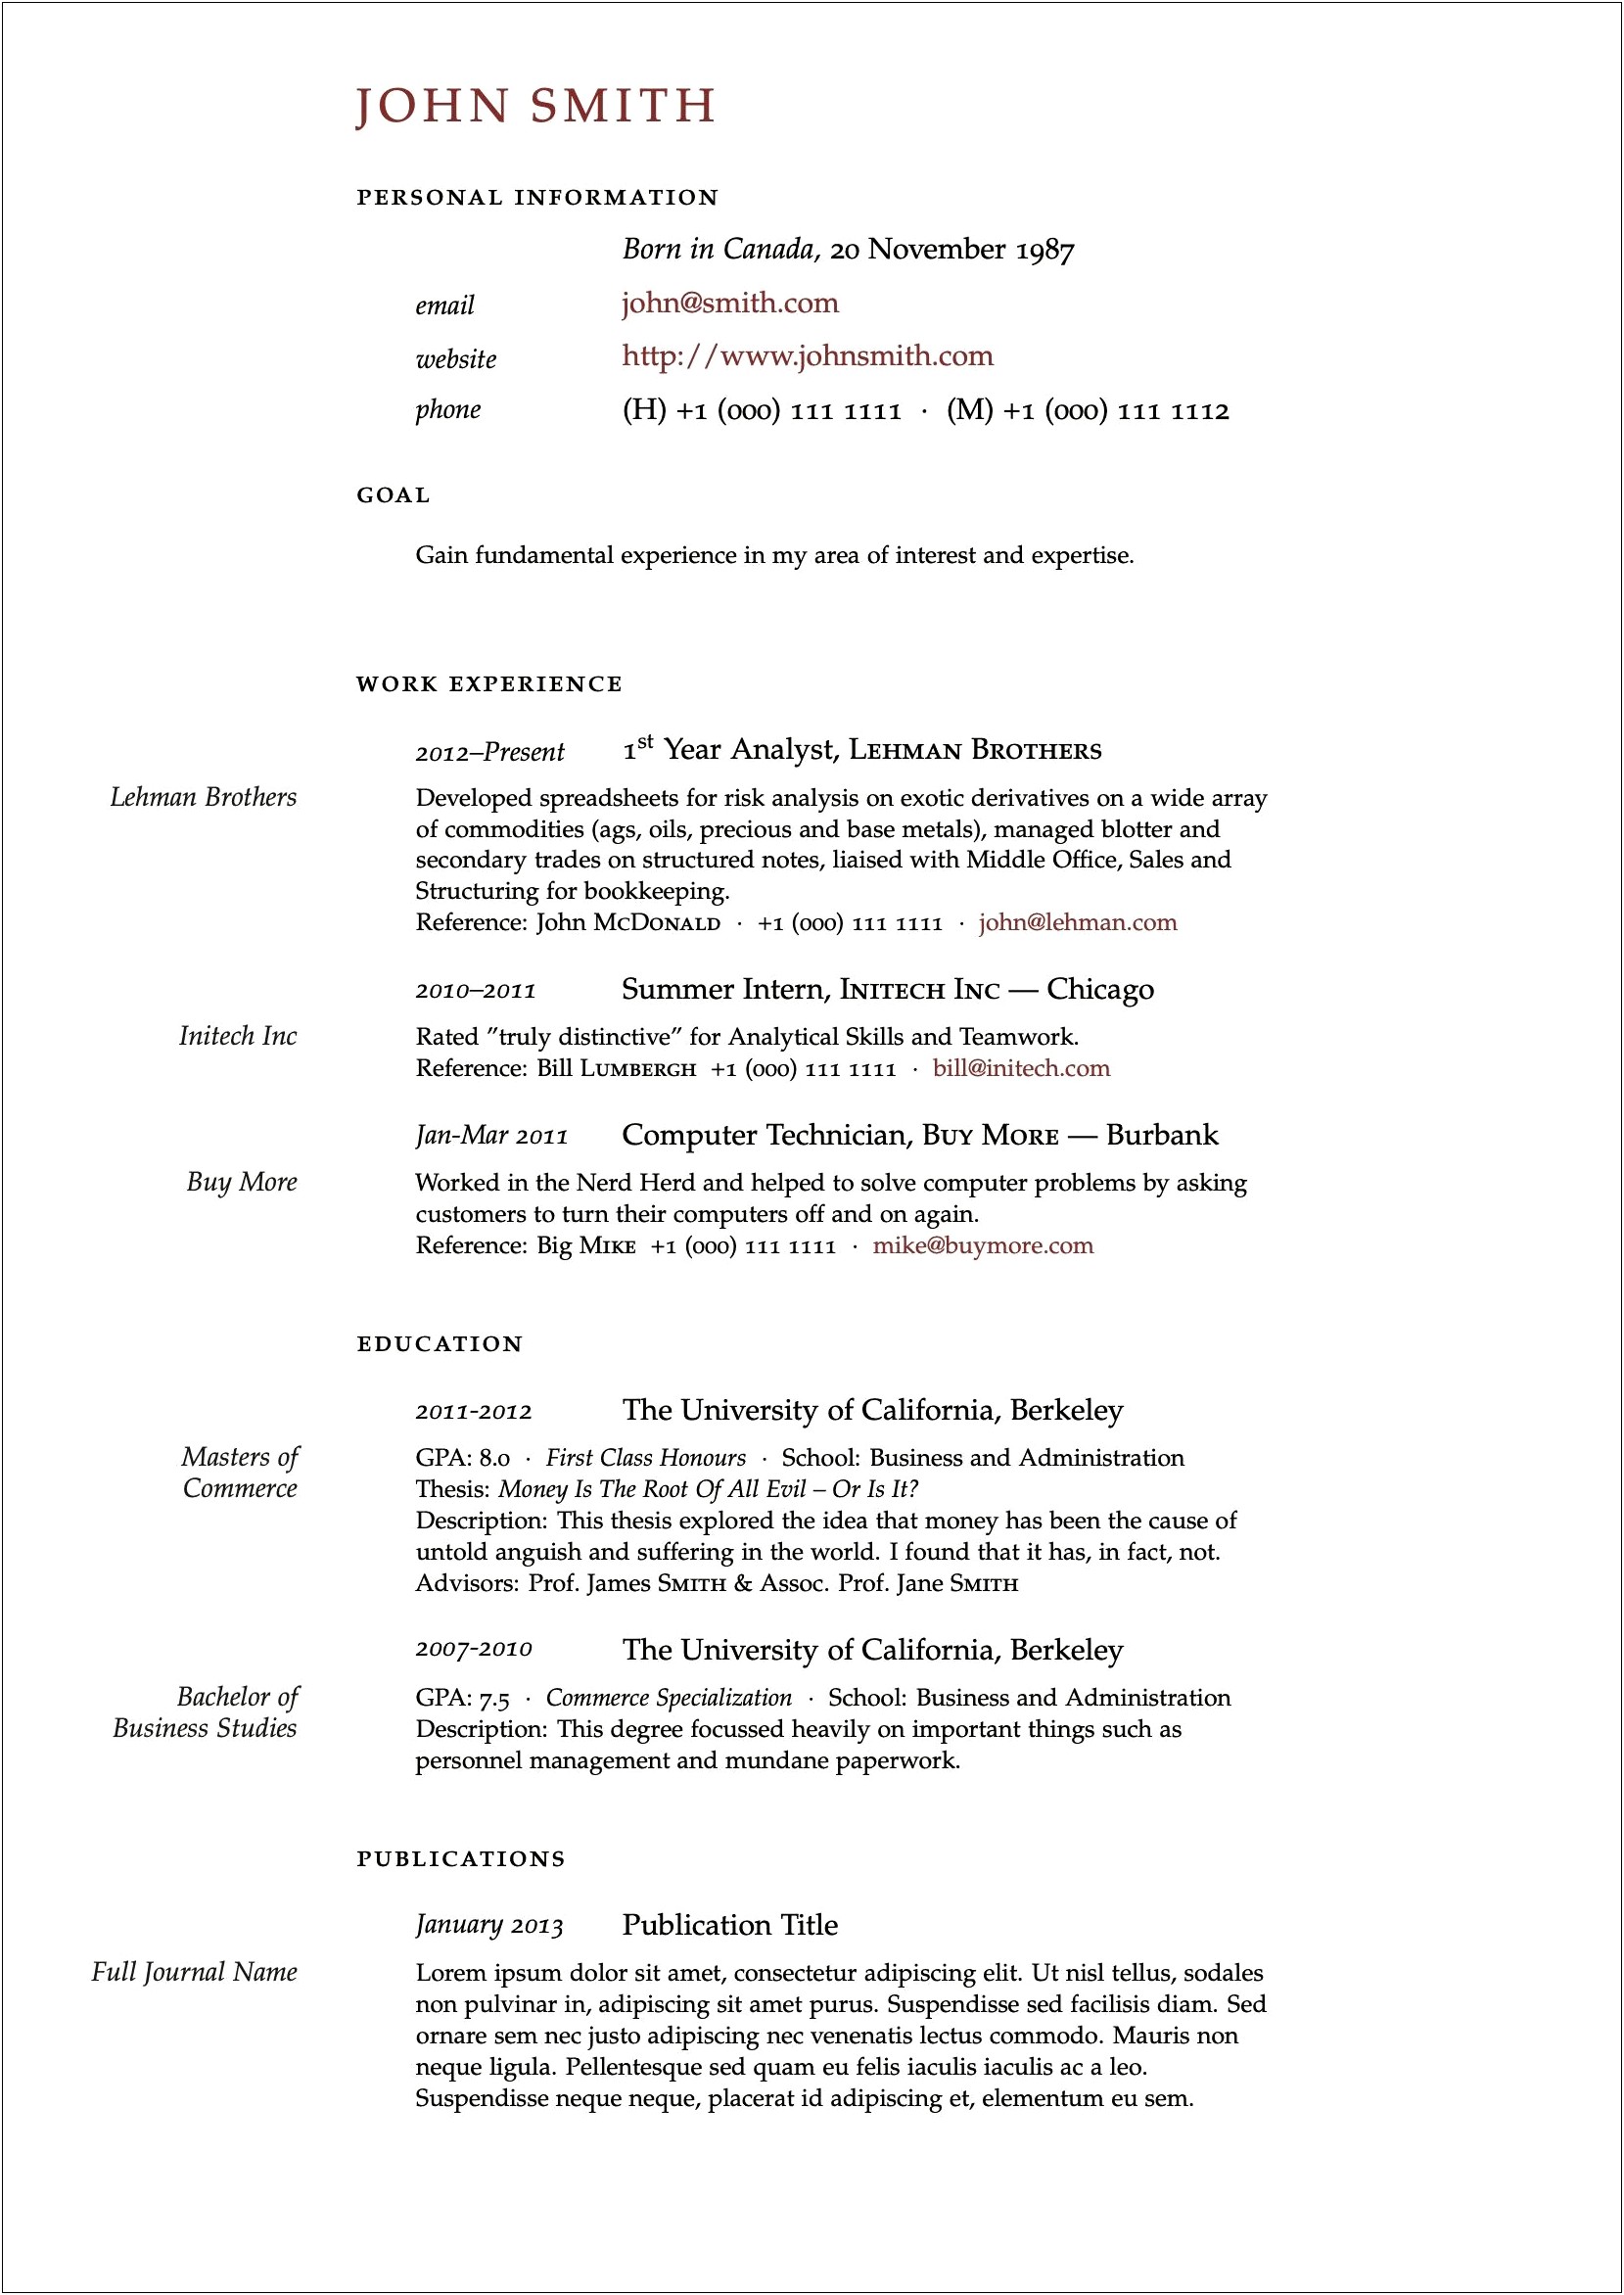 Sample Of Resume With Education Batchelors Degree